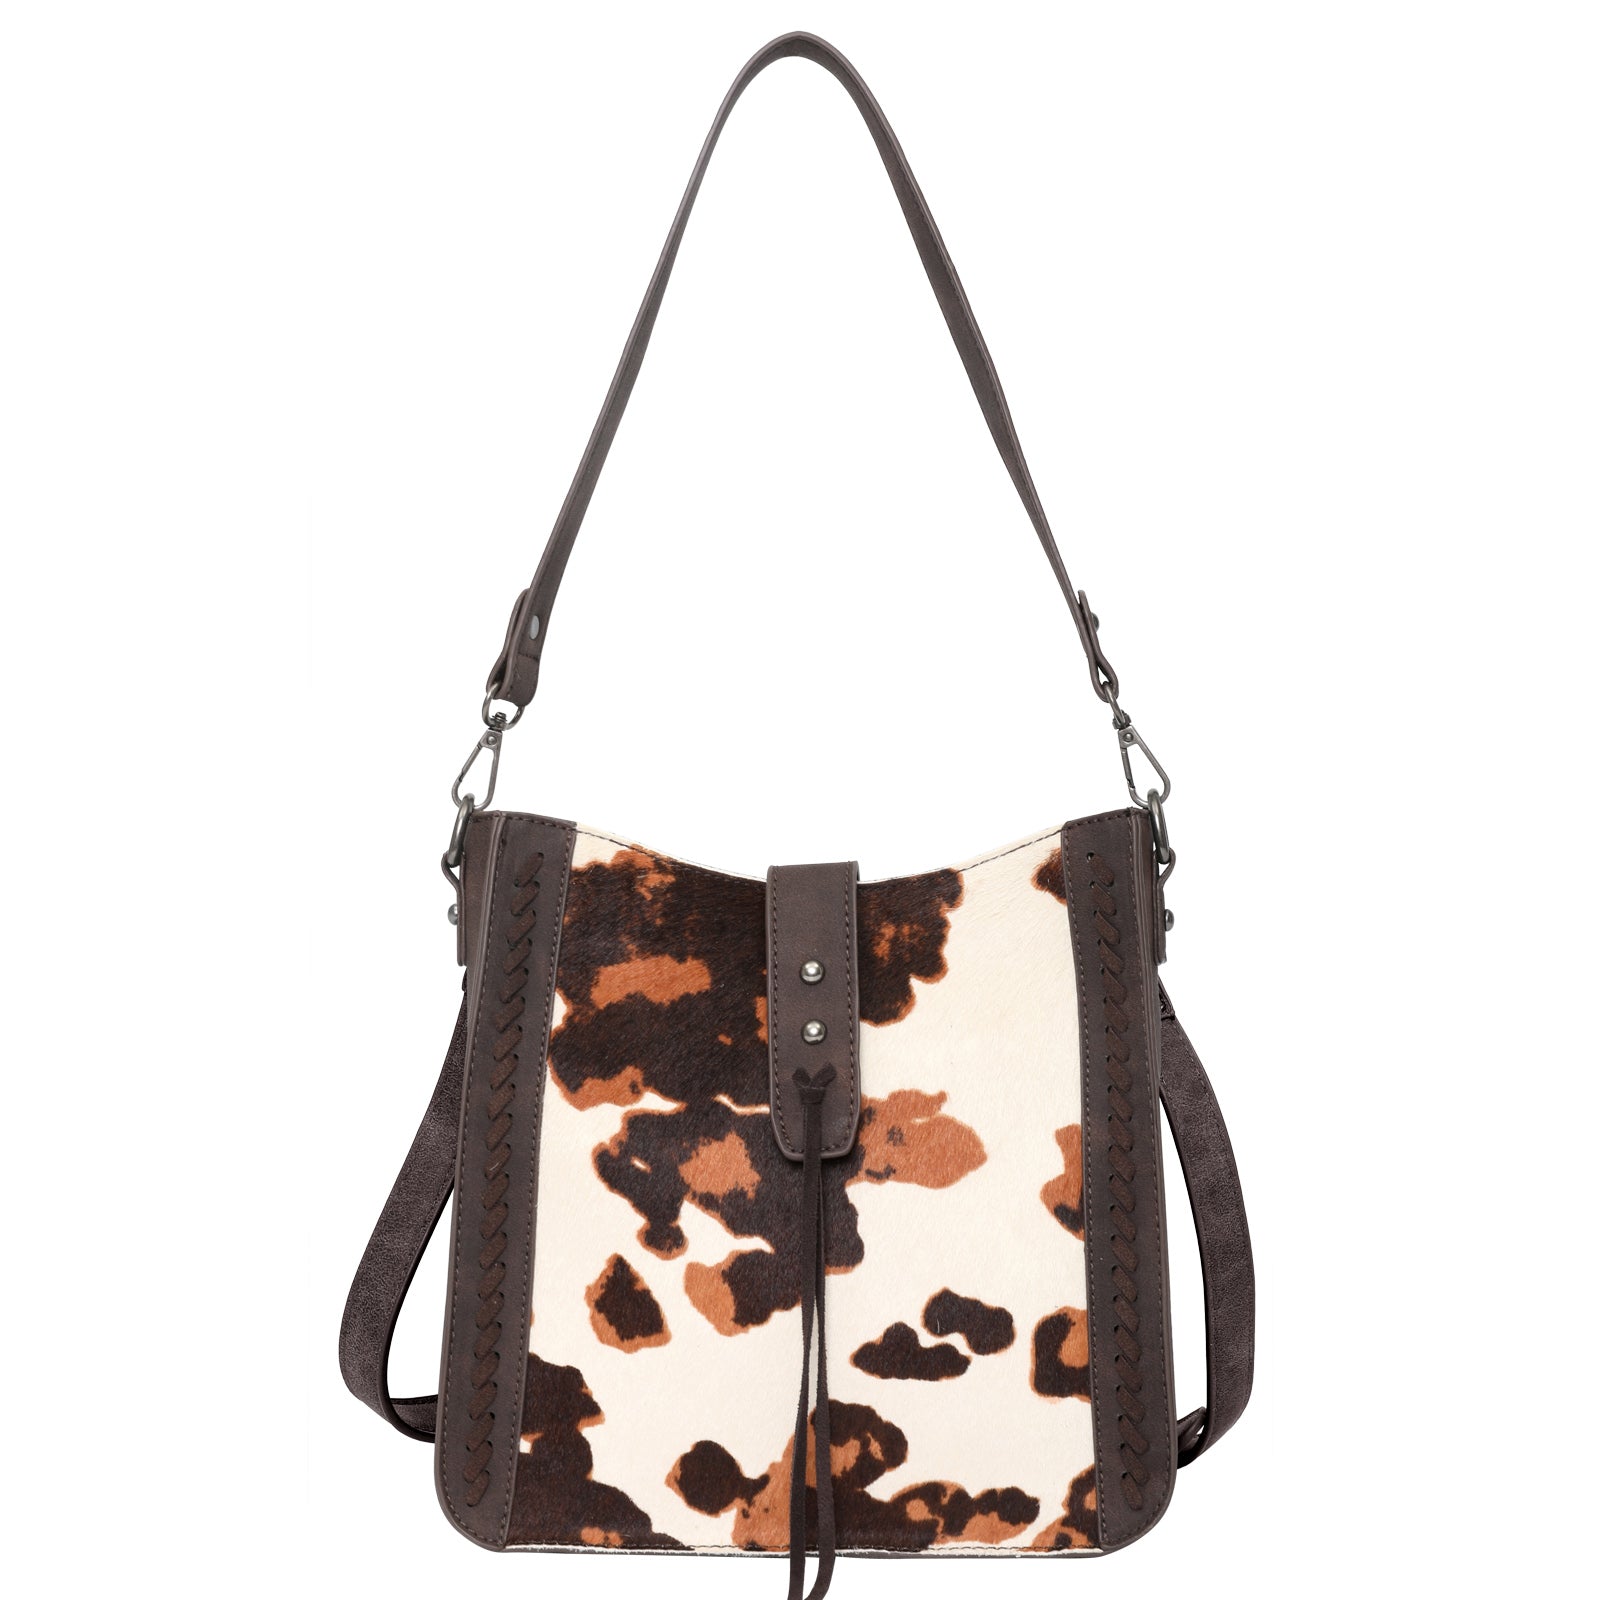 Wrangler Hair-on Collection Concealed Carry Hobo/Crossbody - Cowgirl Wear